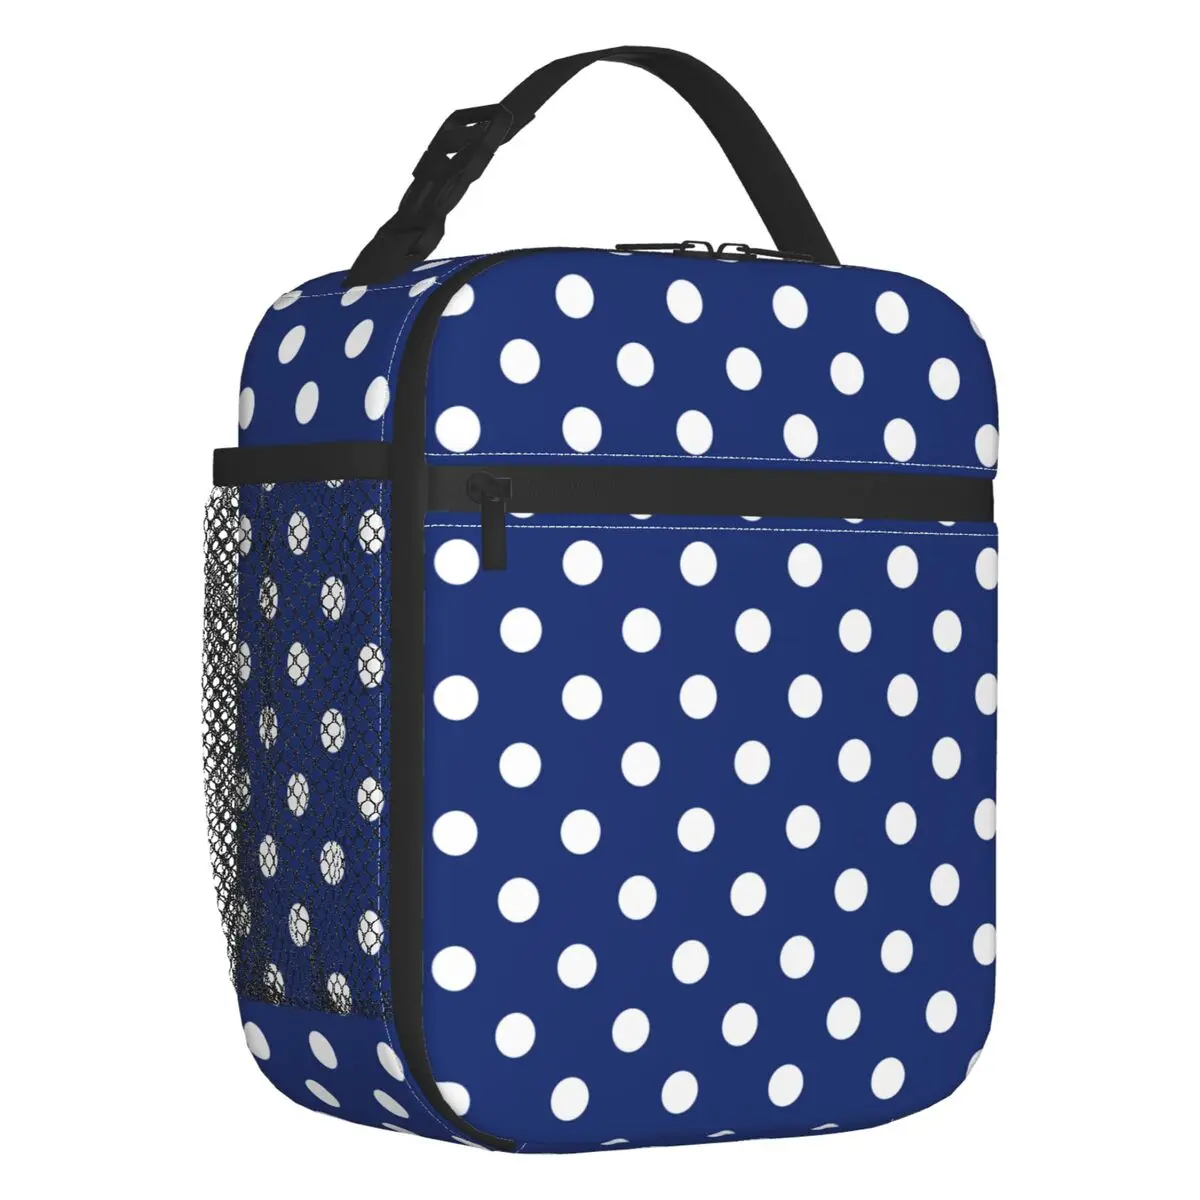 White Polka Dots Navy Blue Seamless Pattern Insulated Lunch Bag Waterproof Cooler Thermal Lunch Tote Beach Camping Travel